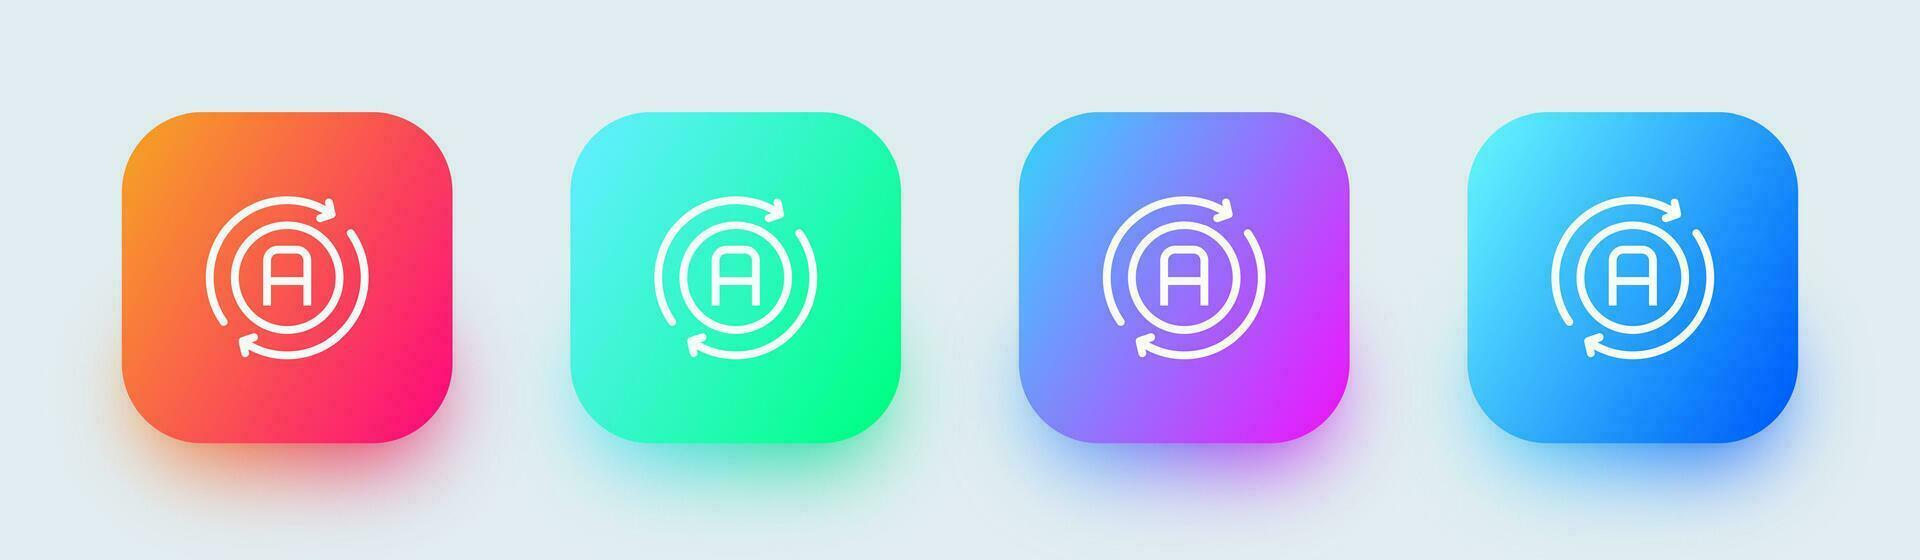 Automation line icon in square gradient colors. Innovation technology signs vector illustration.